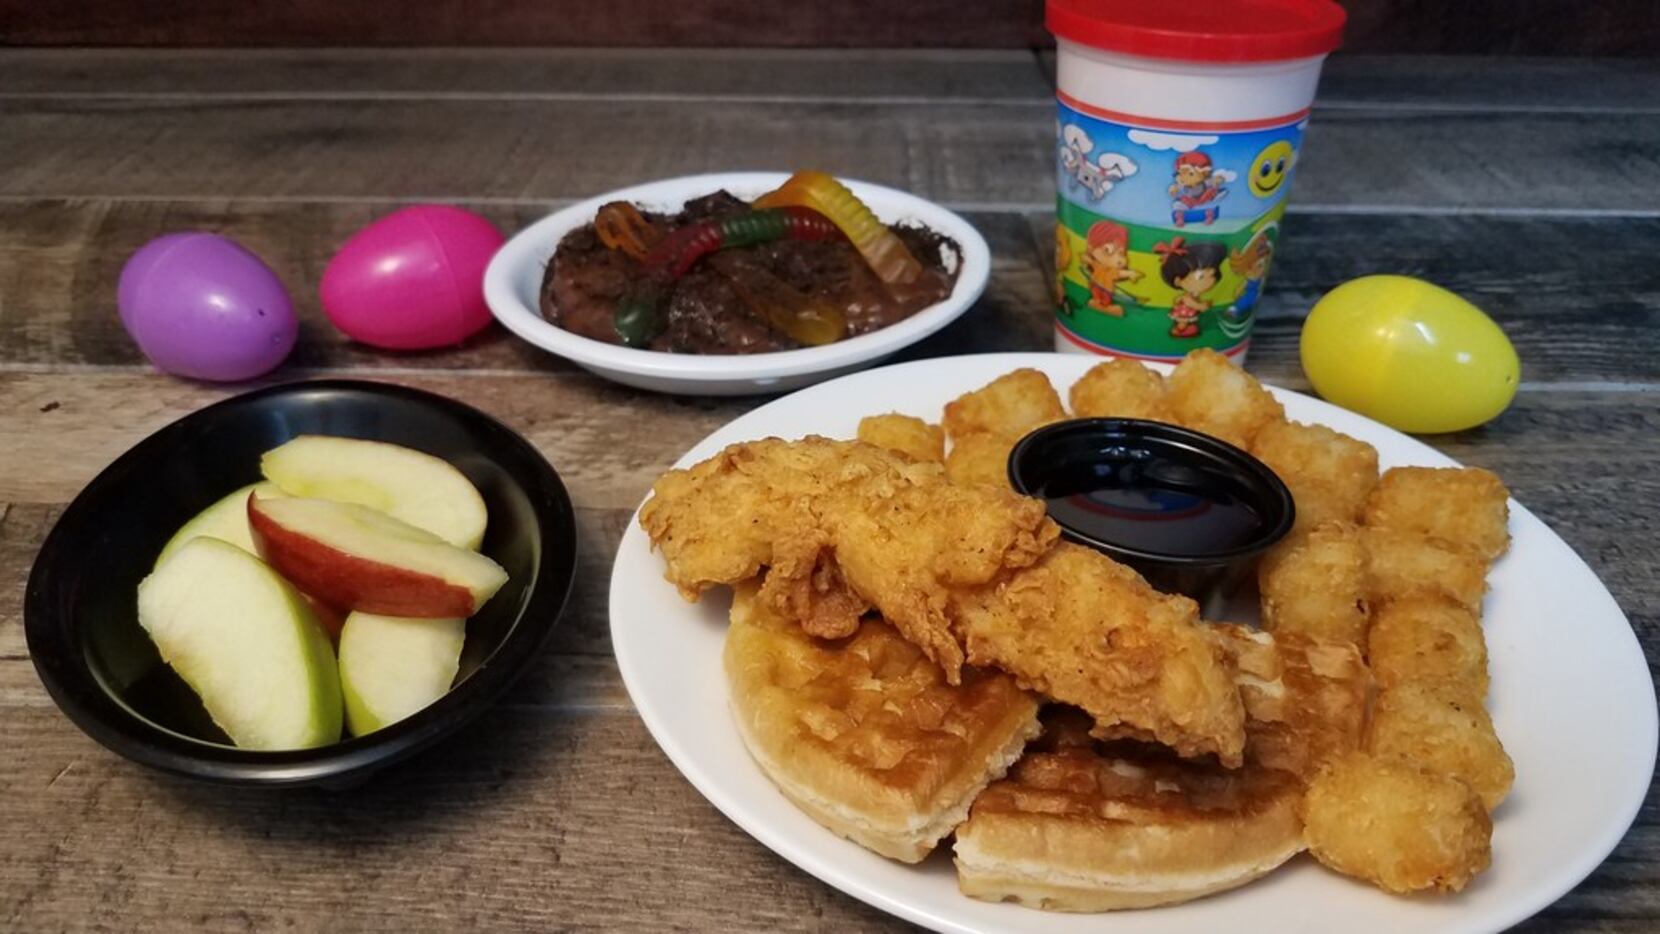 Humperdinks locations will offer Easter brunch for $5.99 for kids 12 and younger. Options...